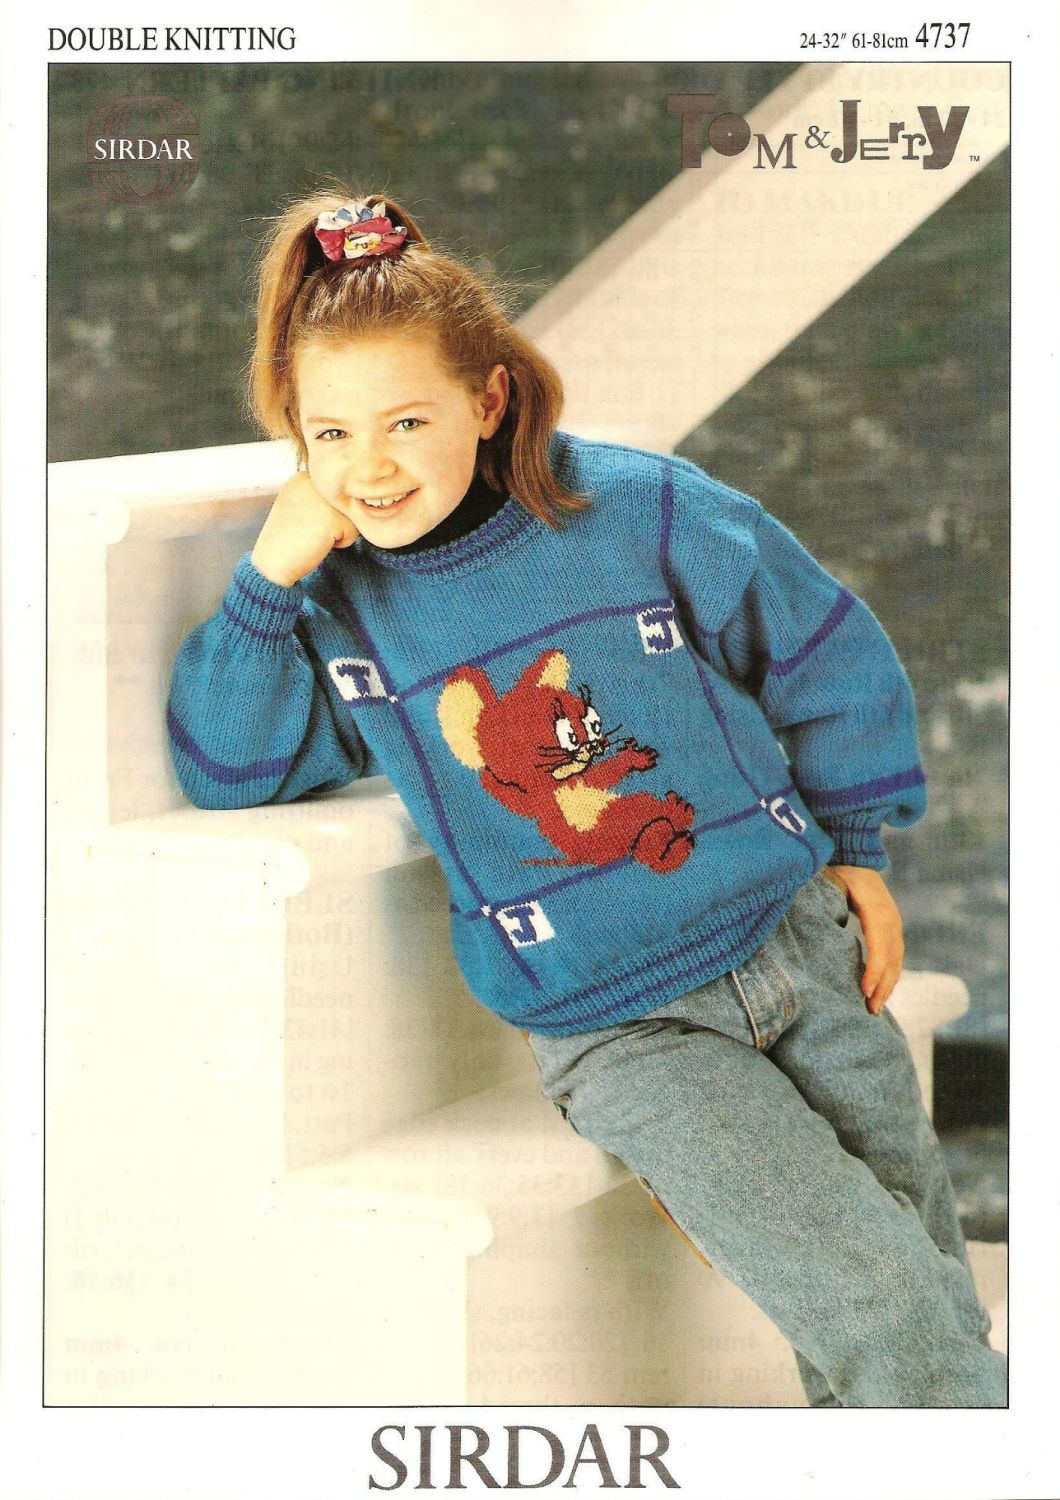 Tom And Jerry - Jerry - Jumper / Sweater Knitting Pattern - NEW